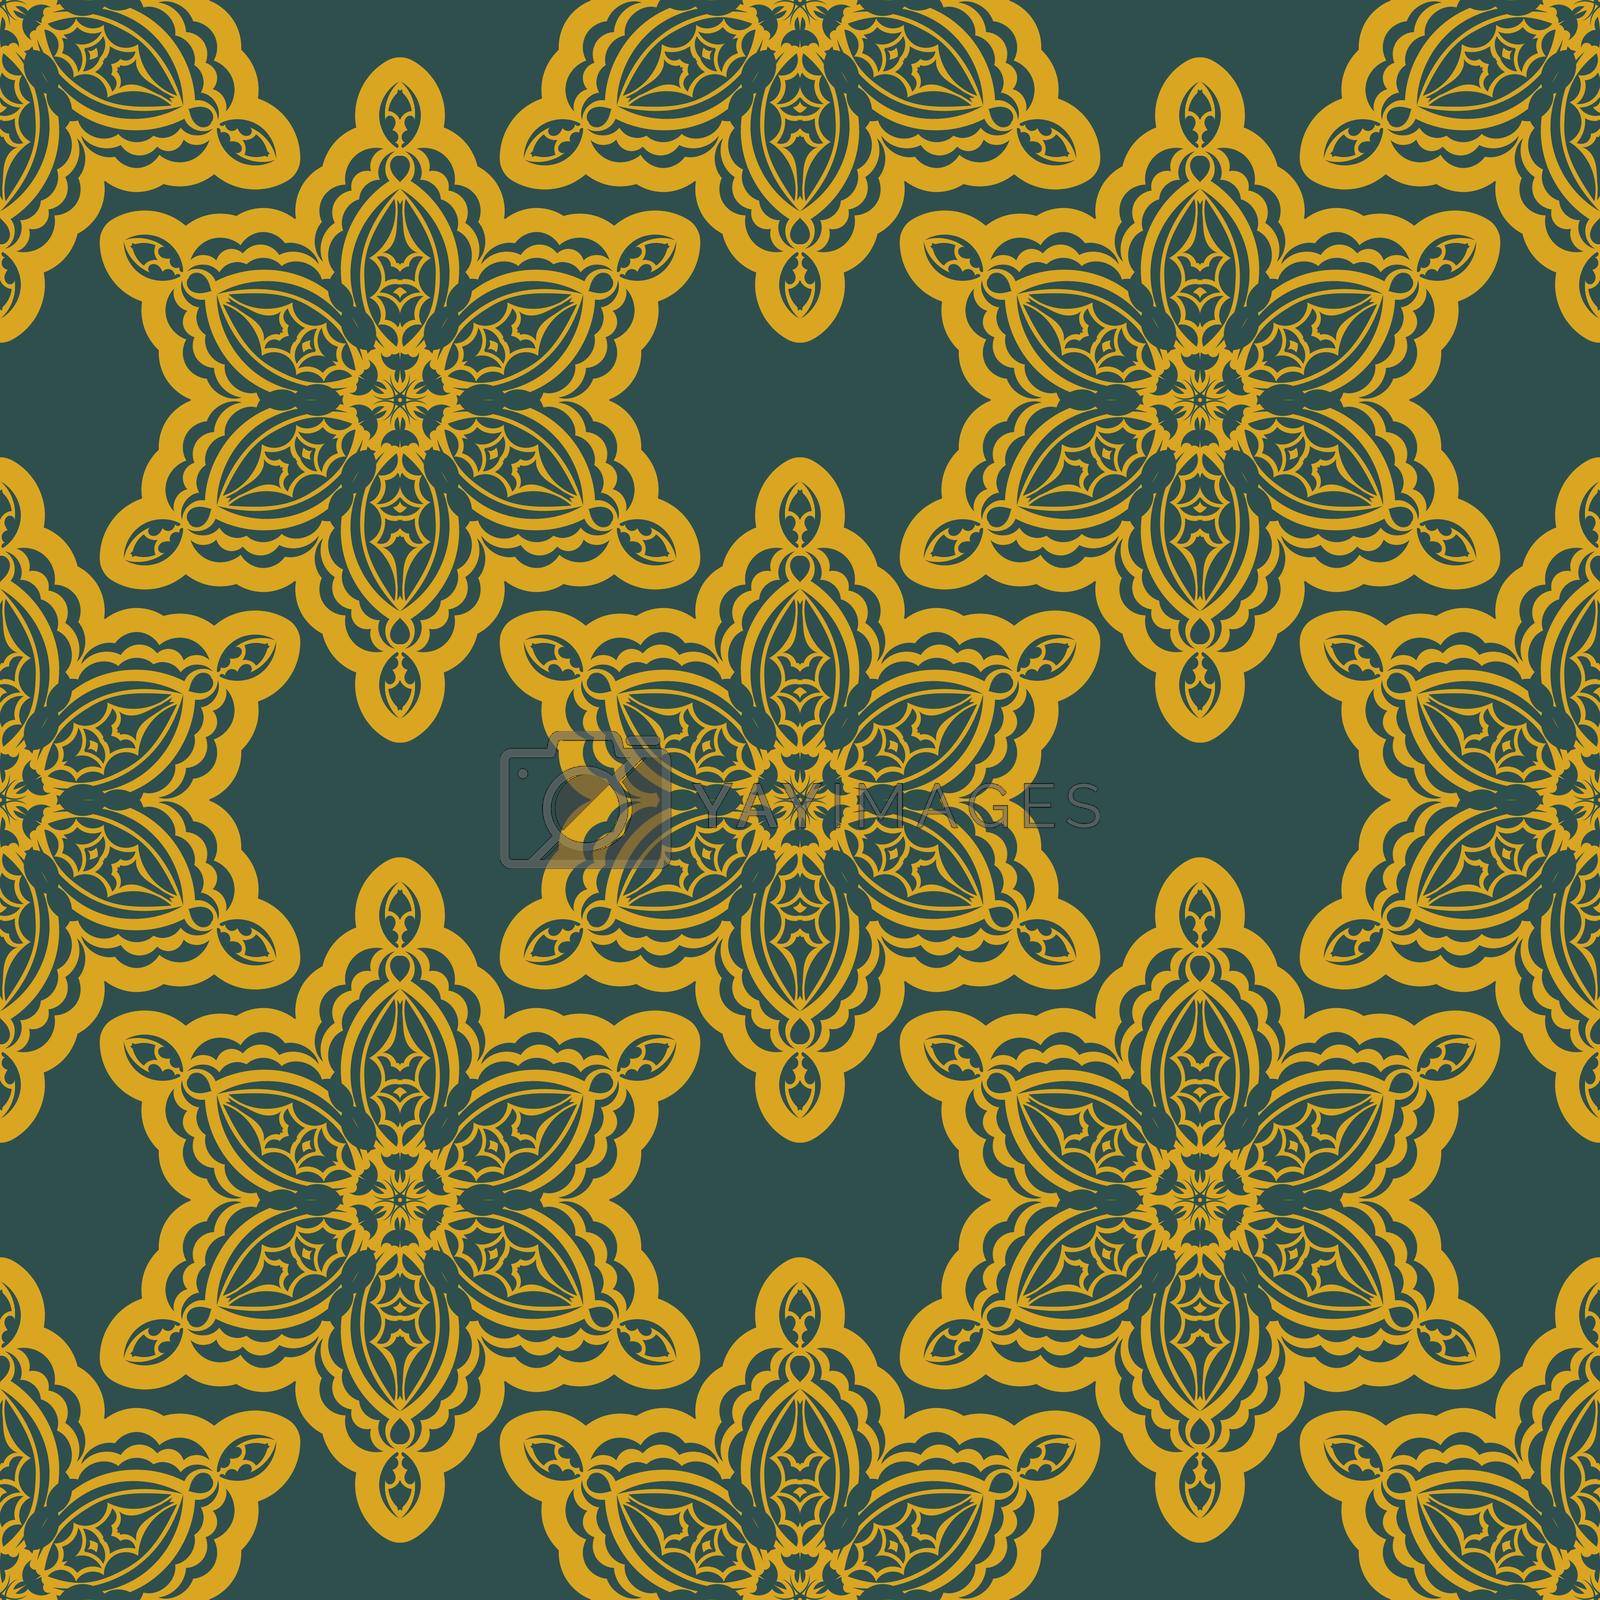 Green and yellow seamless pattern with vintage ornament. Good for clothing, textiles, backgrounds and prints. Vector illustration.